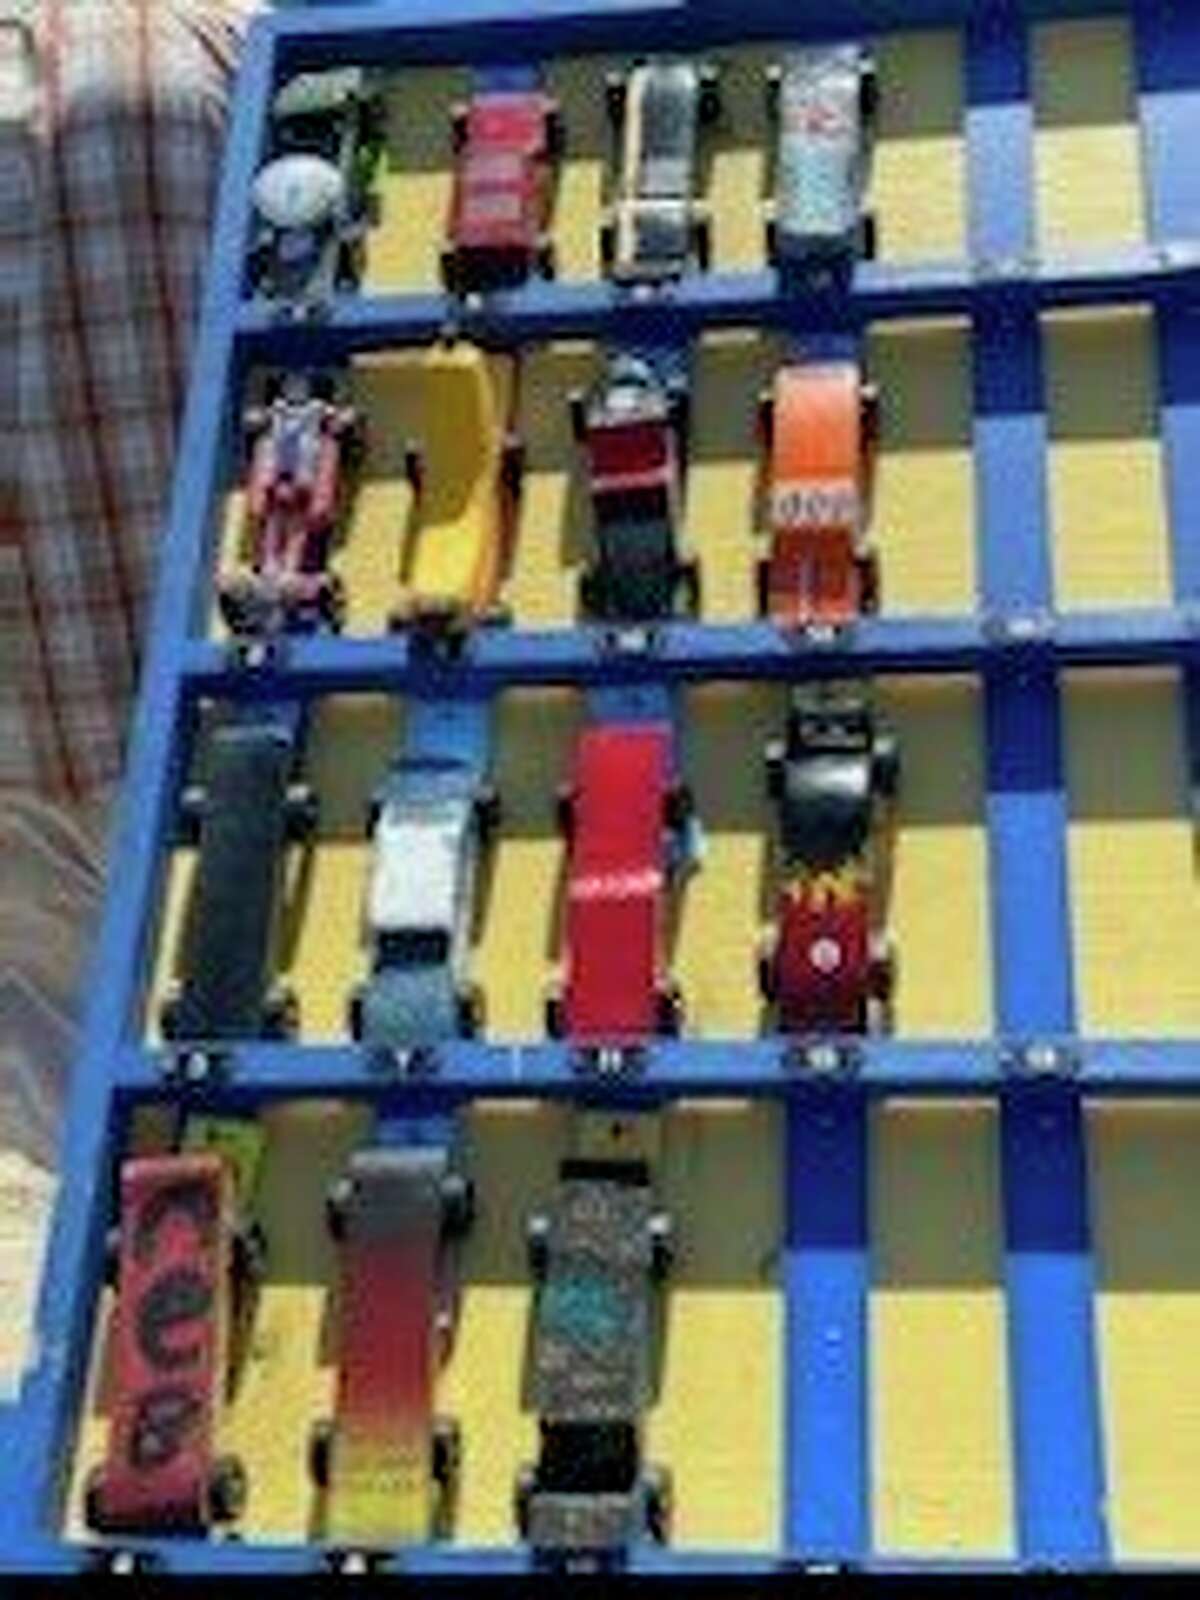 Scouts from BSA Troop 74 in Reed City entered their handmade cars in the annual Pinewood Derby race June 28 at the Scout House. Contestants were awarded trophies for first through third place finishes and Best in Show for each age category. (Submitted photo)